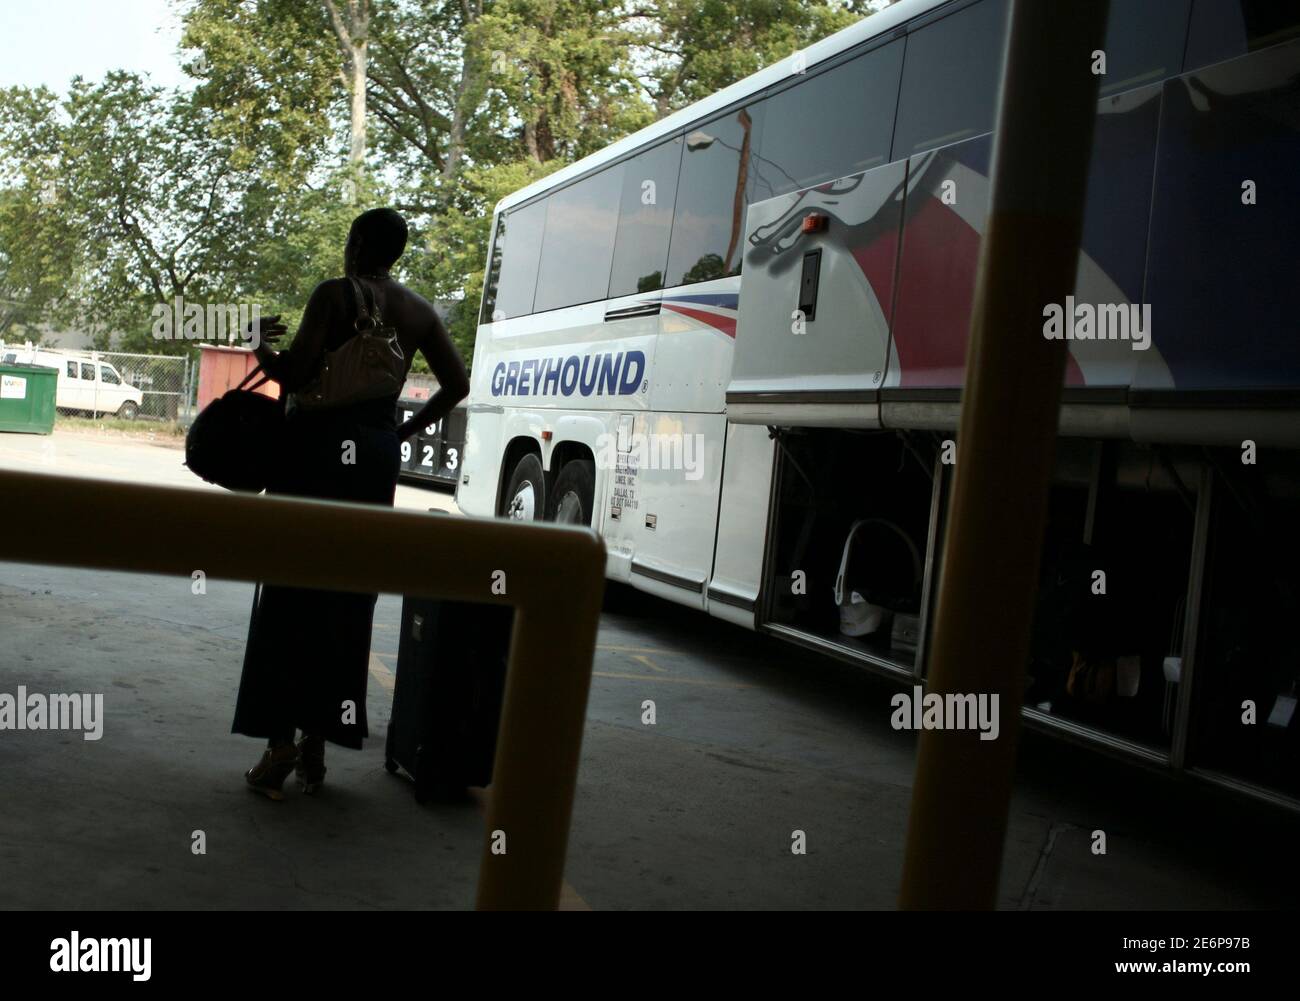 A woman stands next to a Greyhound bus at a bus station in Columbus,  Georgia, May 11, 2007. Greyhound buses are largely perceived as an  affordable if time-consuming, travel alternative. The company